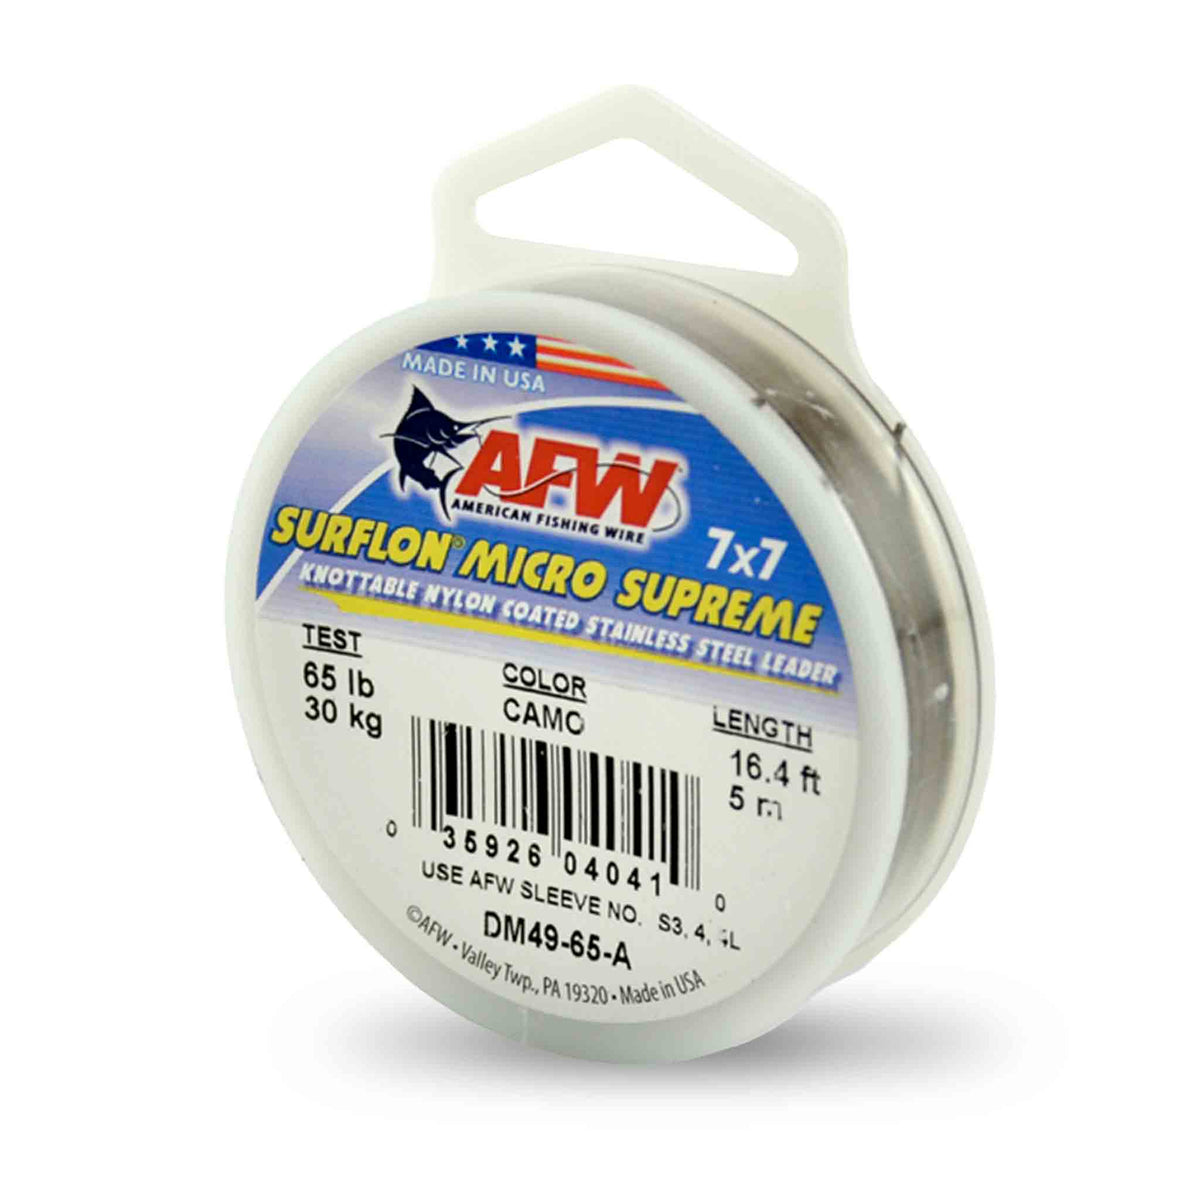 AFW Surfstrand Micro Supreme 7x7 65 lb Fly Leader Materials